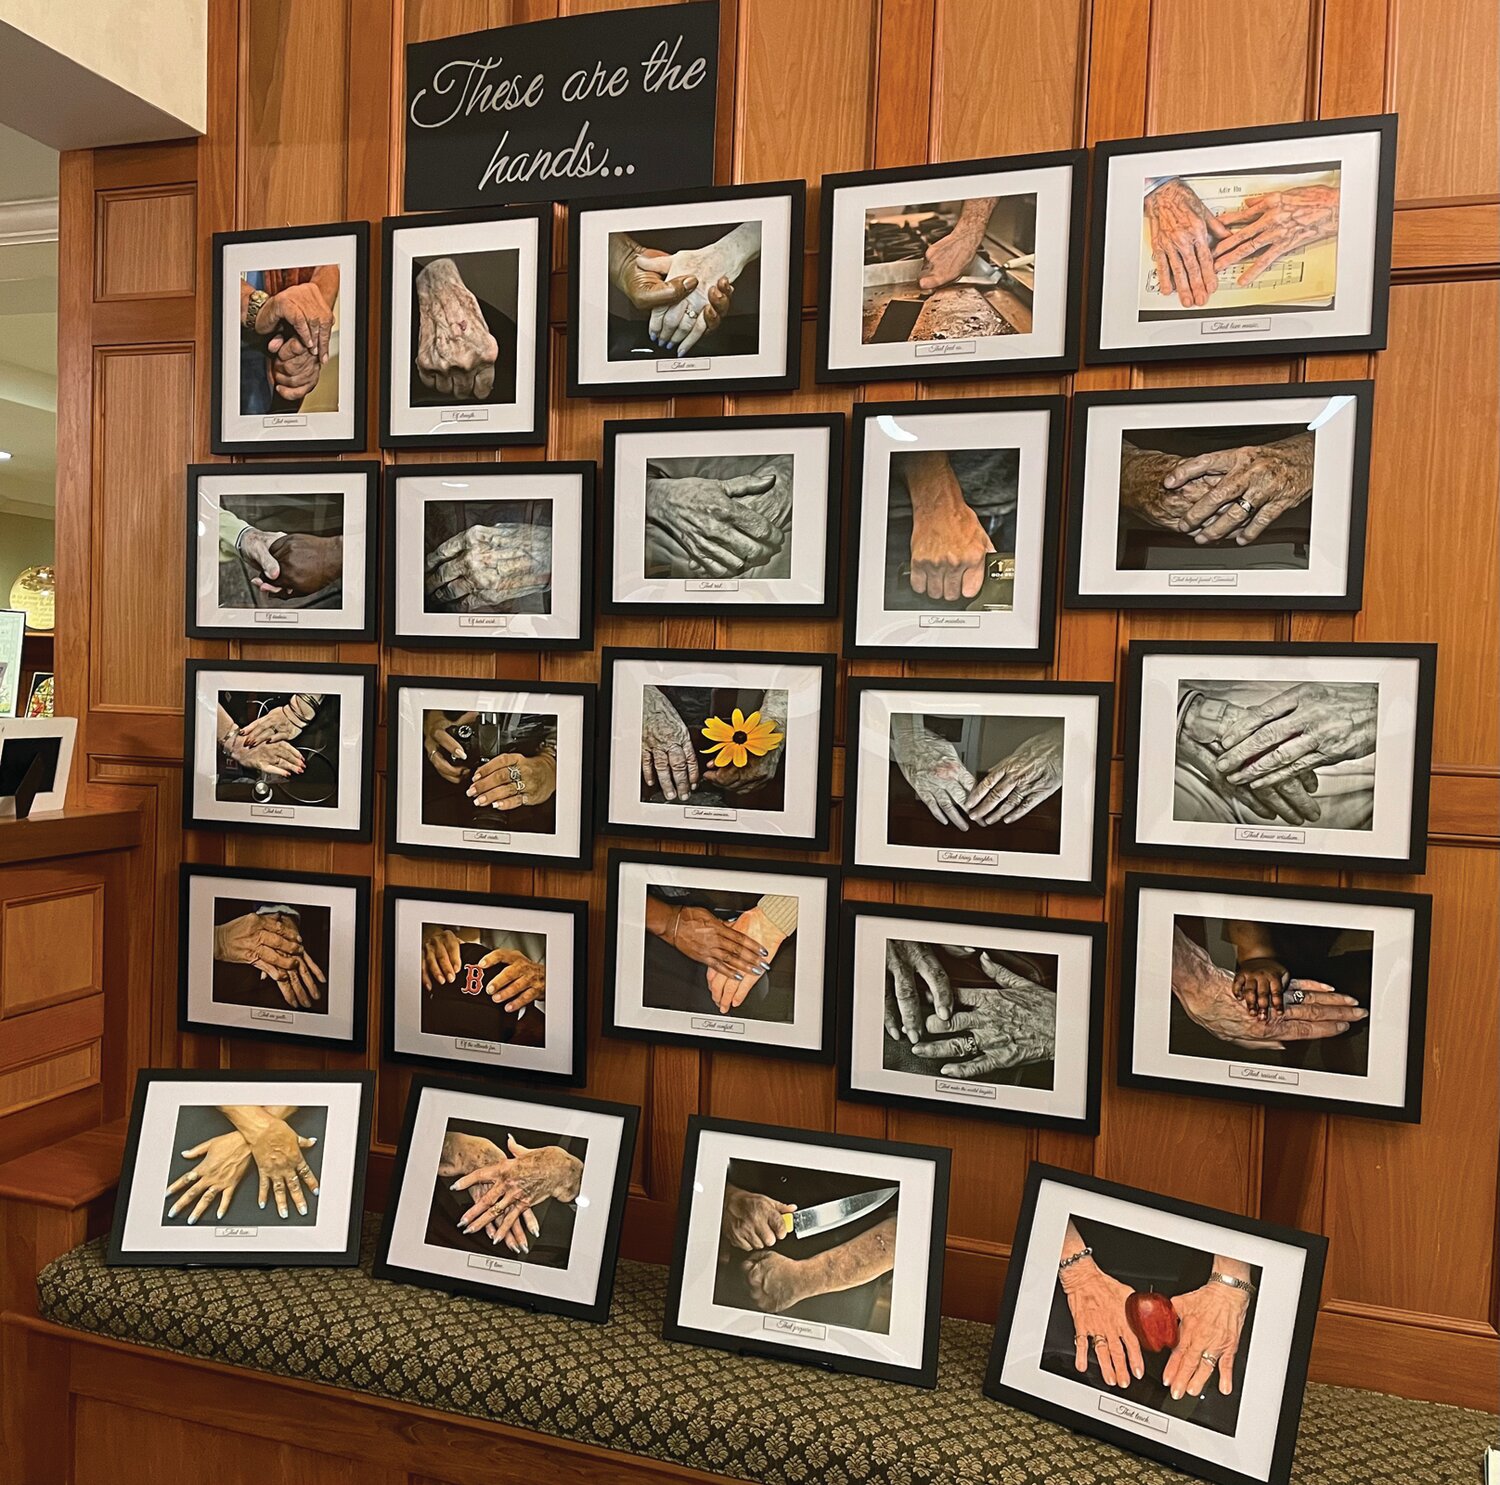 A HAND TO HOLD: An exhibition of hands of the residents of Tamarisk in Warwick was on display at their 20th anniversary on Sunday September 10.